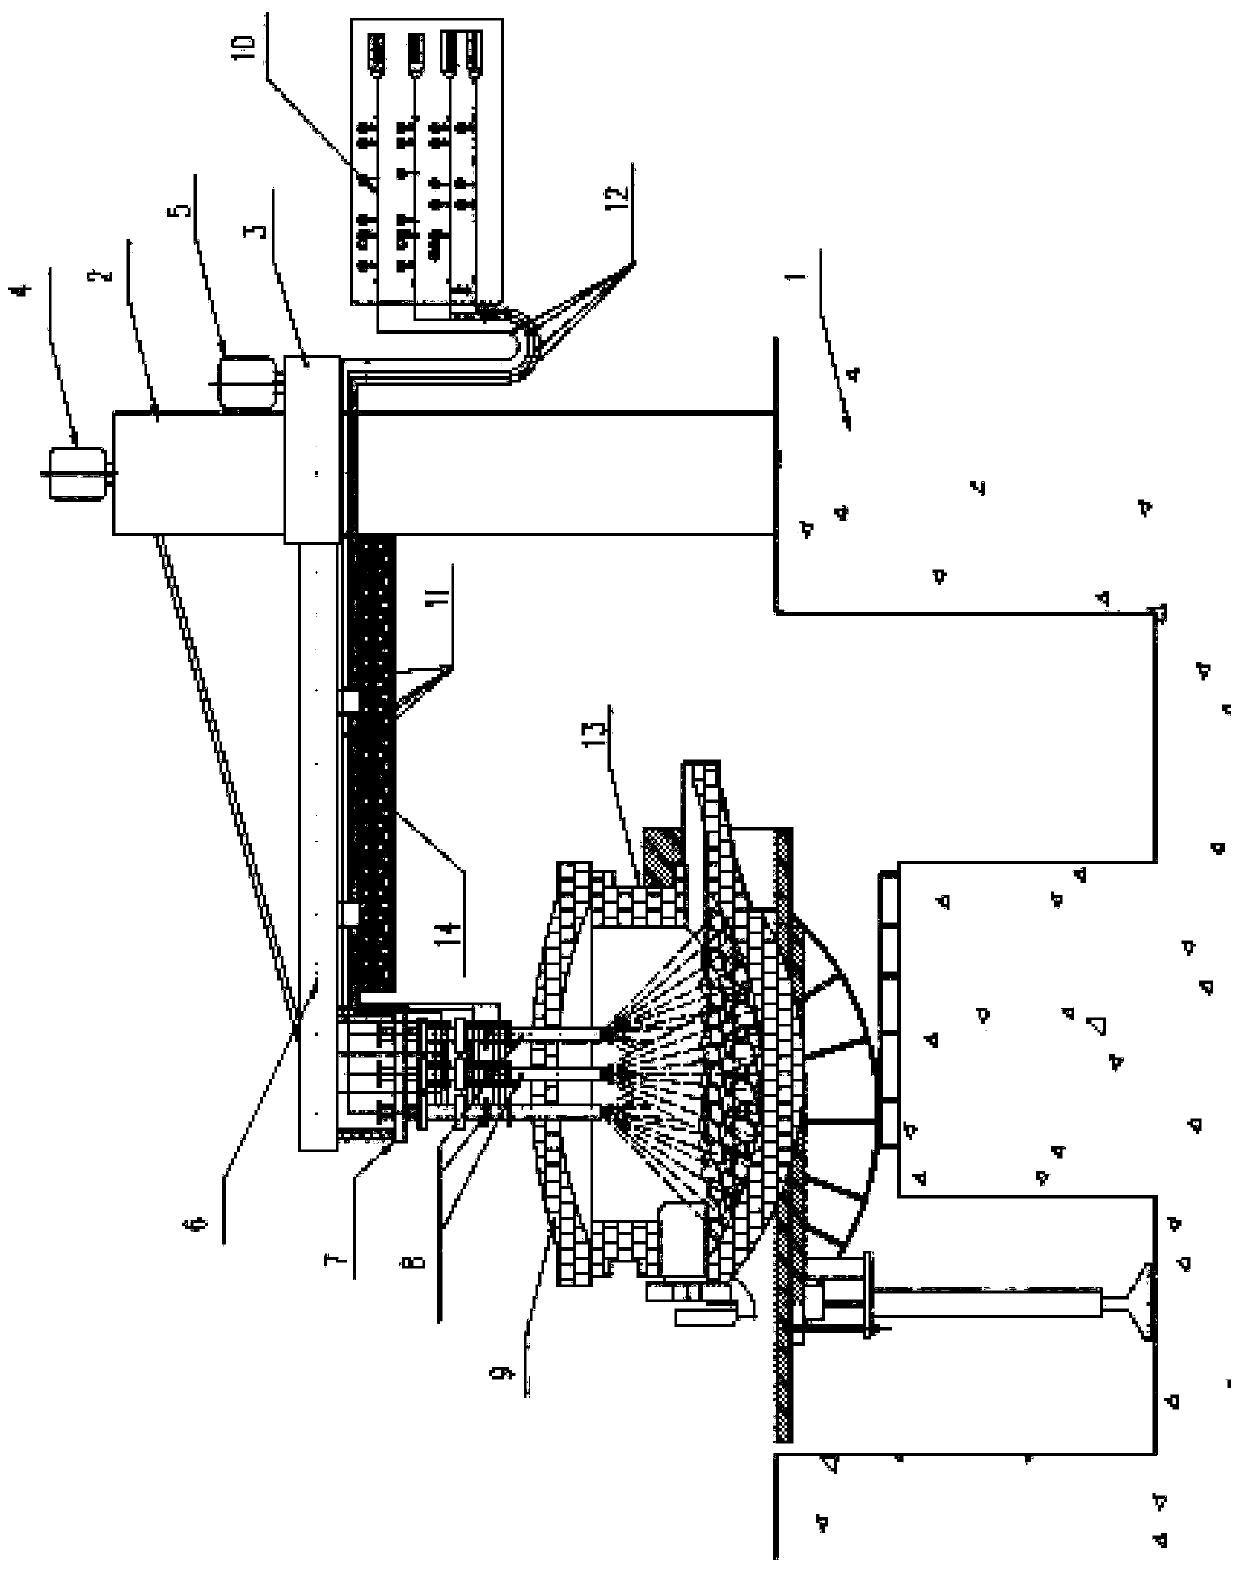 Equipment and method for electric arc furnace steelmaking by using oxygen combustion guns